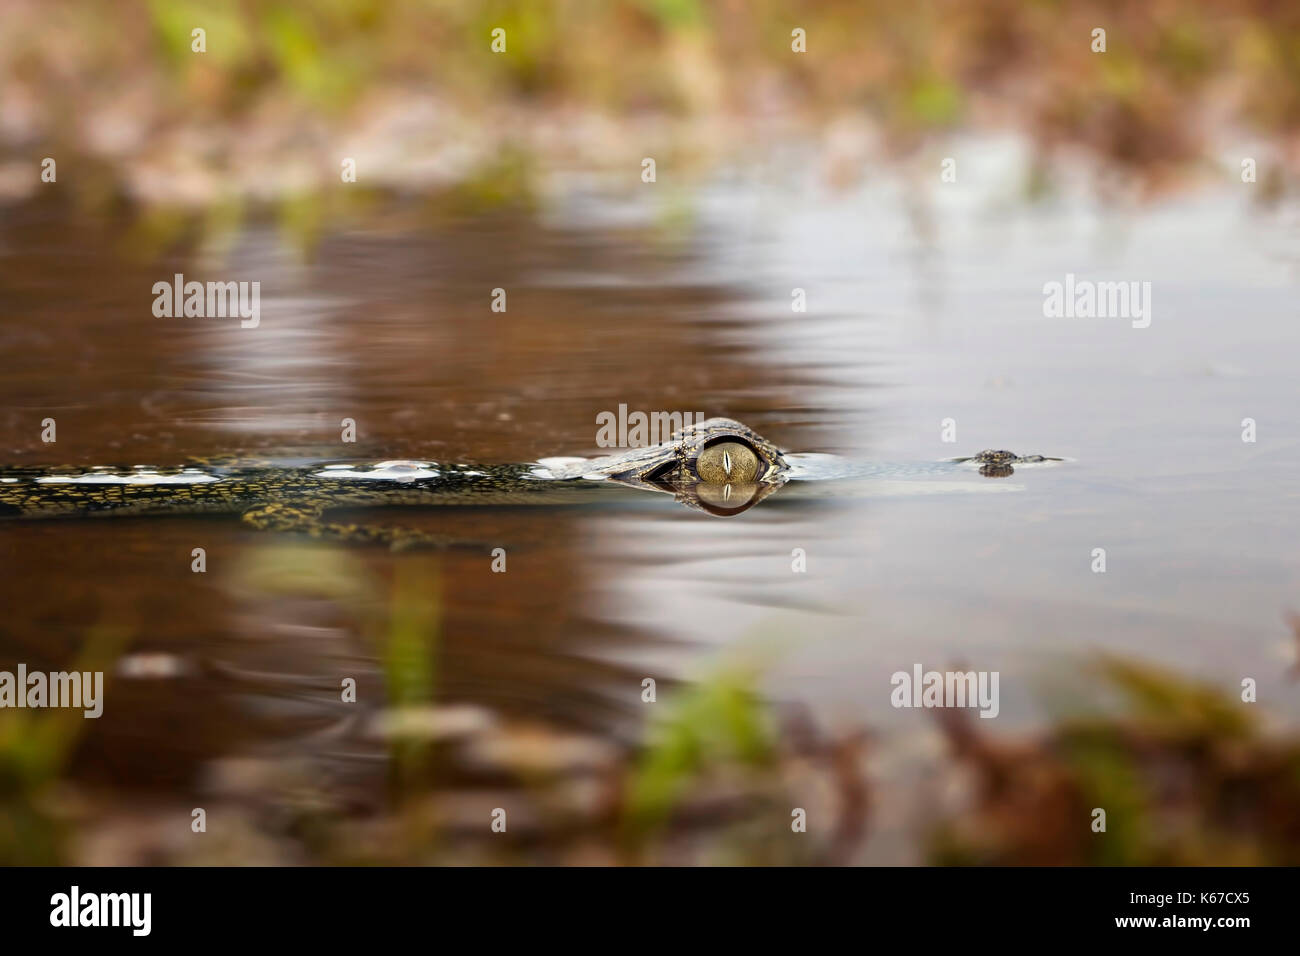 Crocodile head partially submerged in river Stock Photo